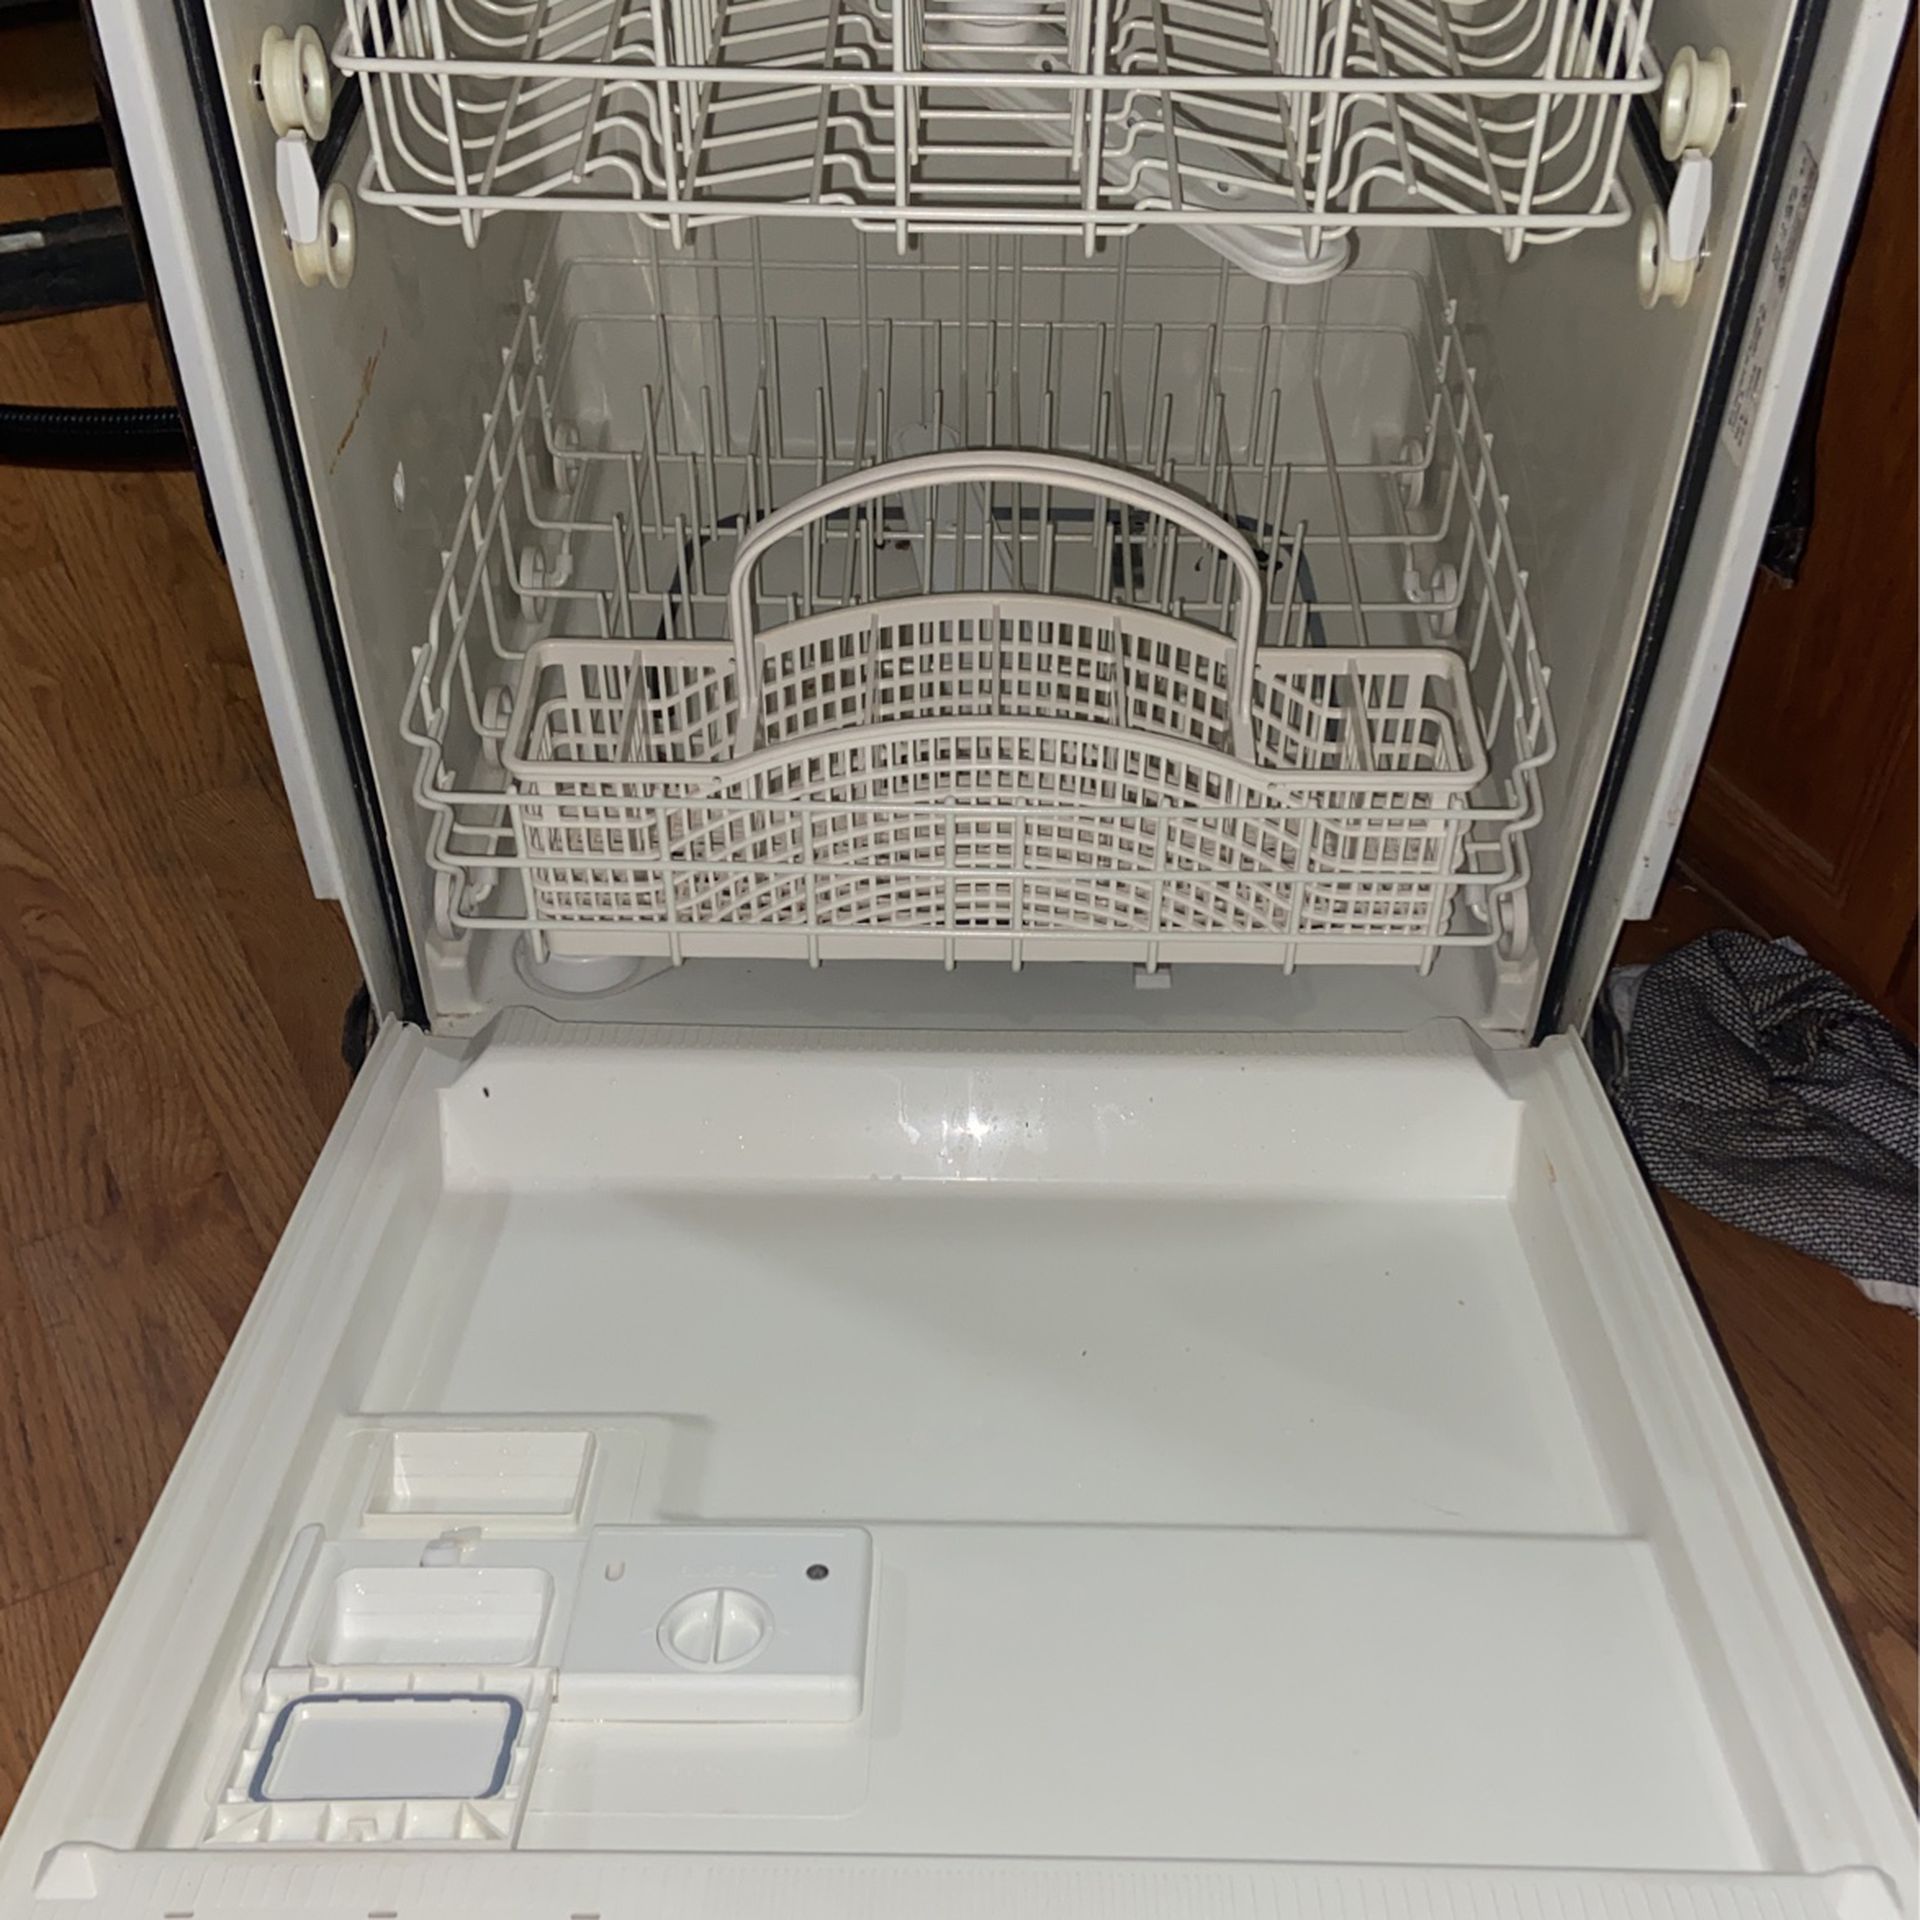 Countertop dishwasher (Danby) for Sale in New York, NY - OfferUp